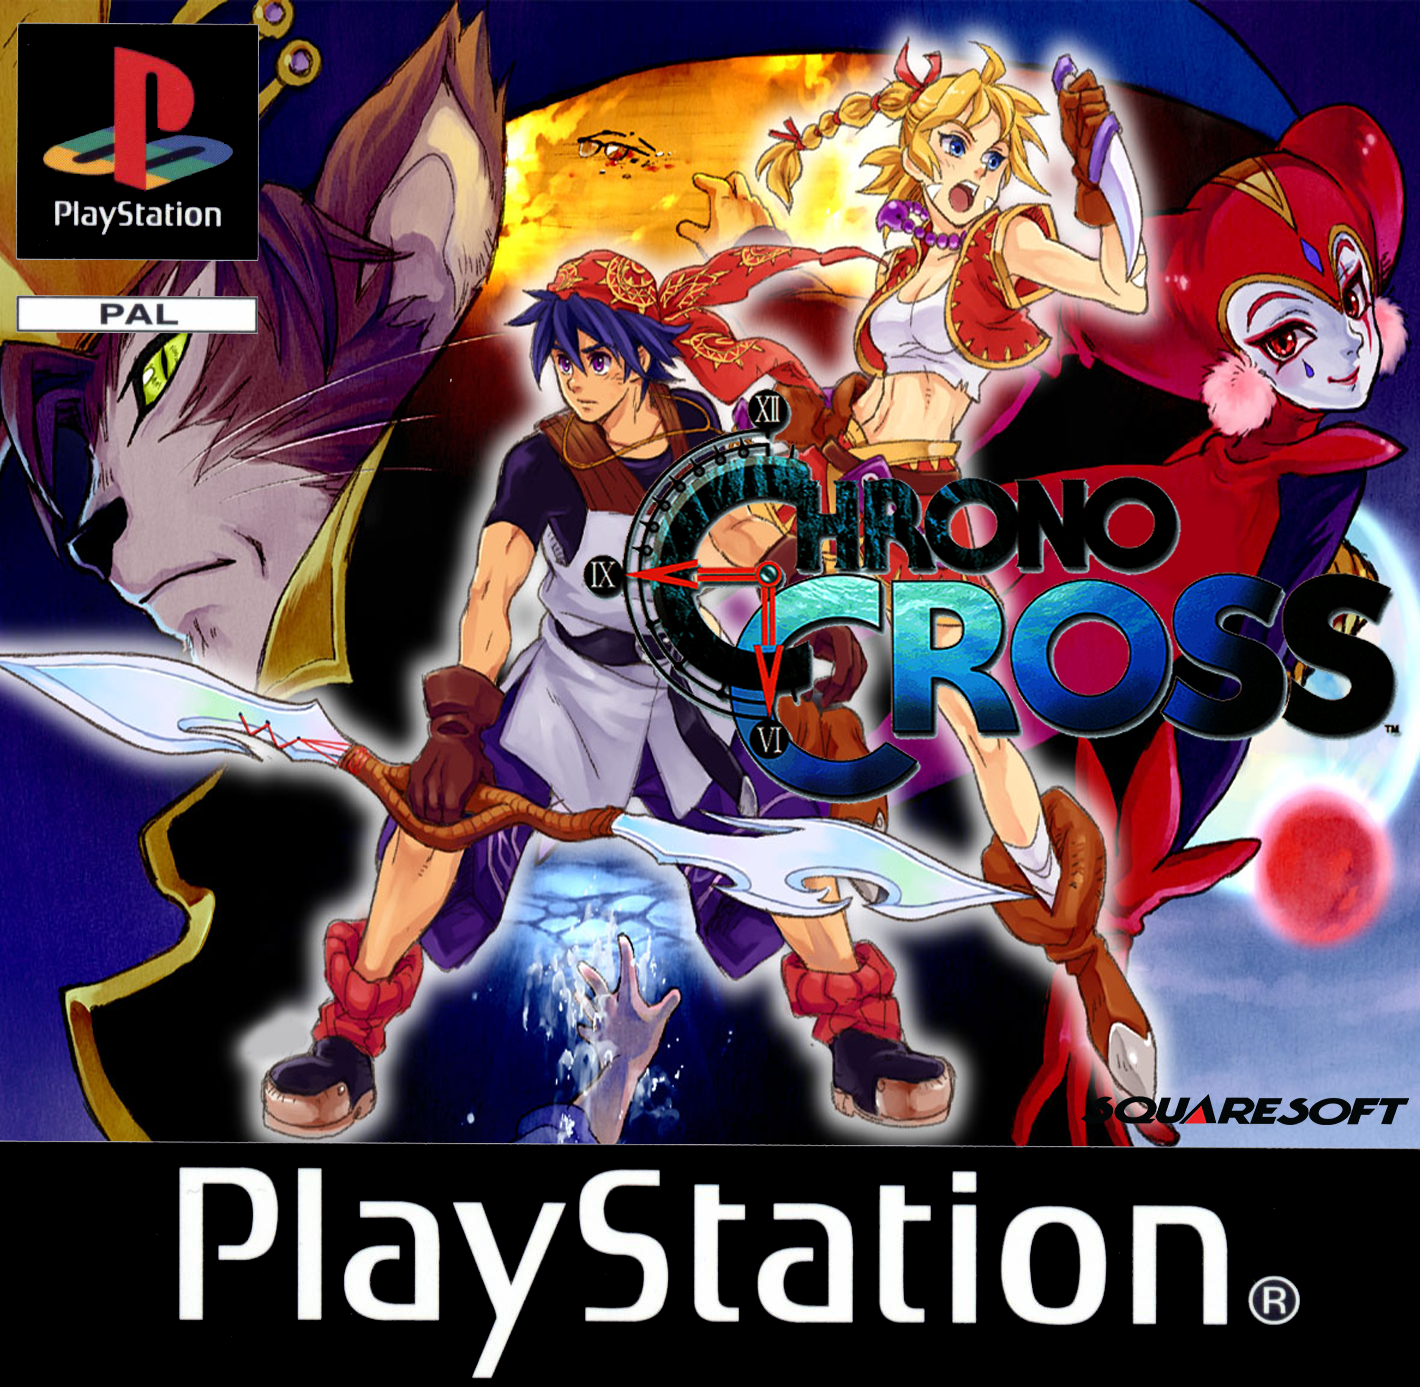 Chrono Cross: The Radical Dreamers Edition Details - LaunchBox Games  Database